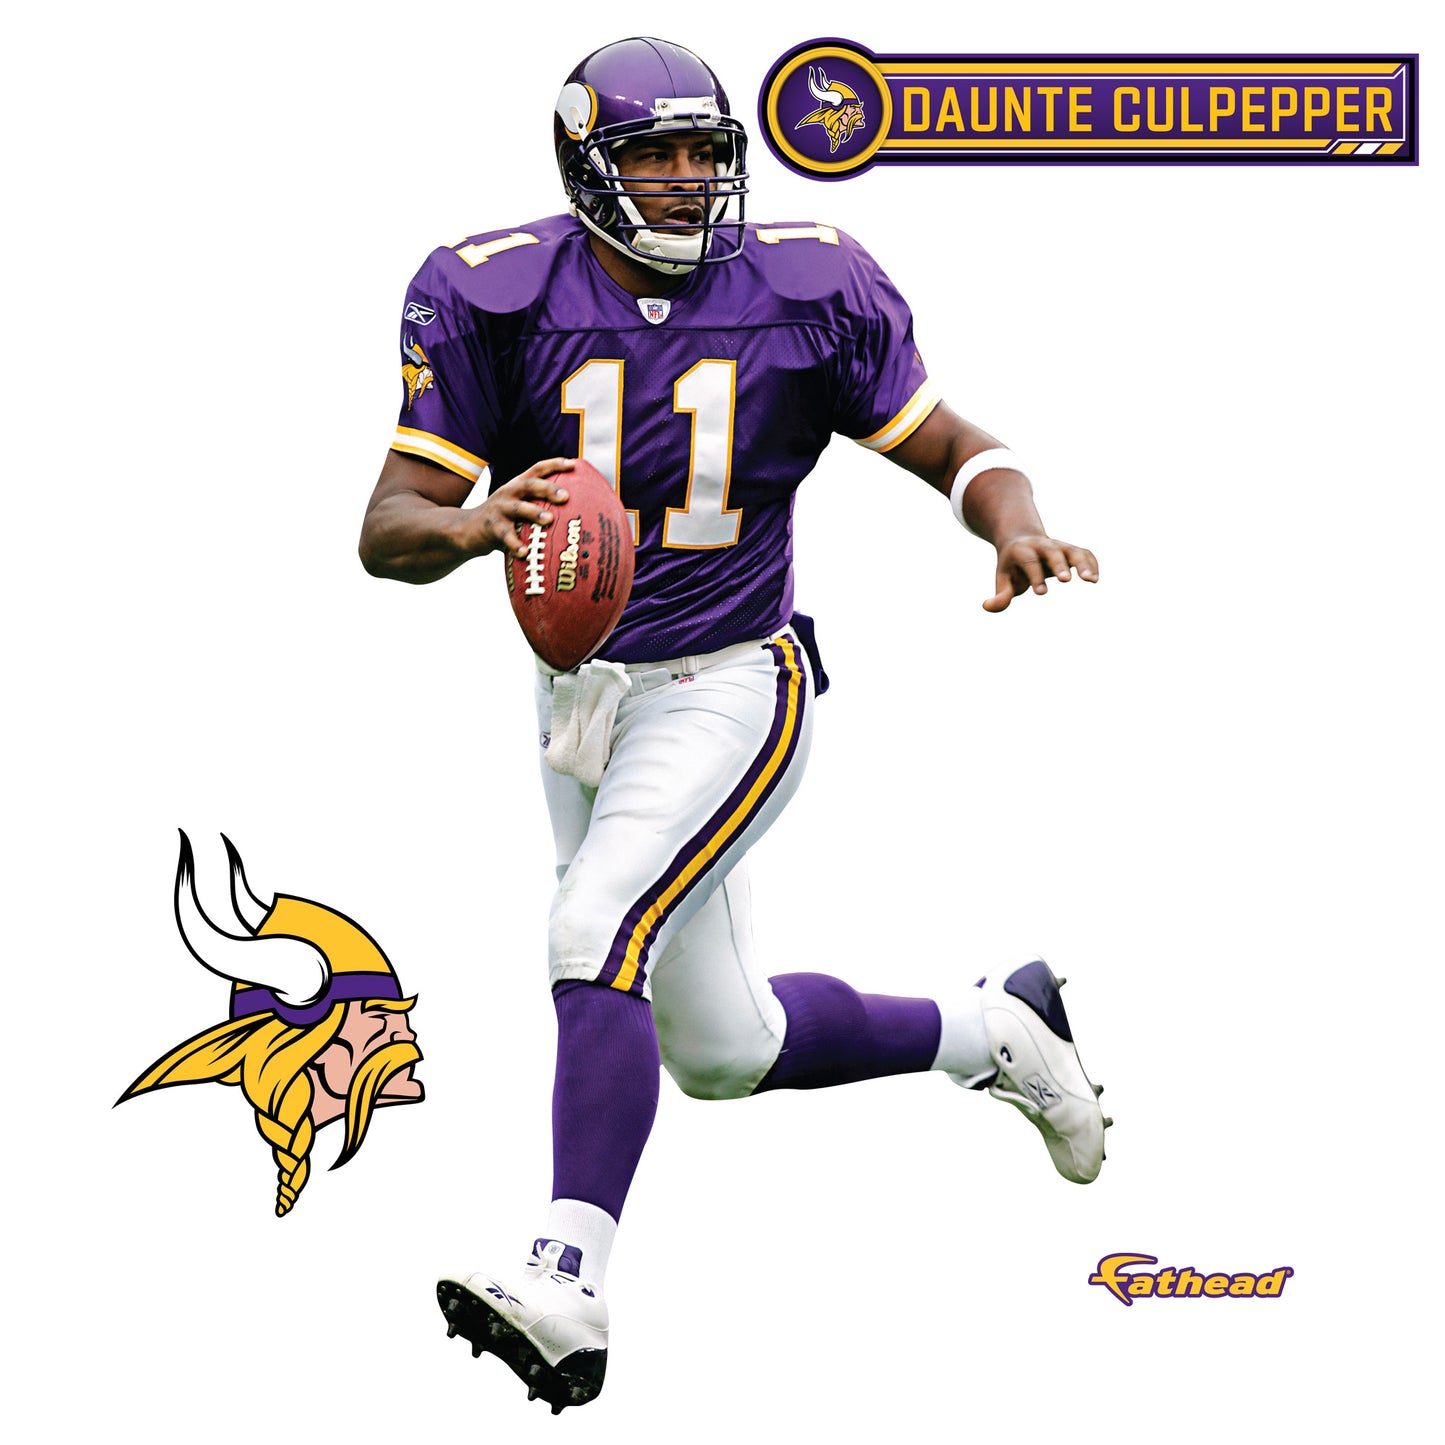 Minnesota Vikings: Daunte Culpepper Legend        - Officially Licensed NFL Removable     Adhesive Decal